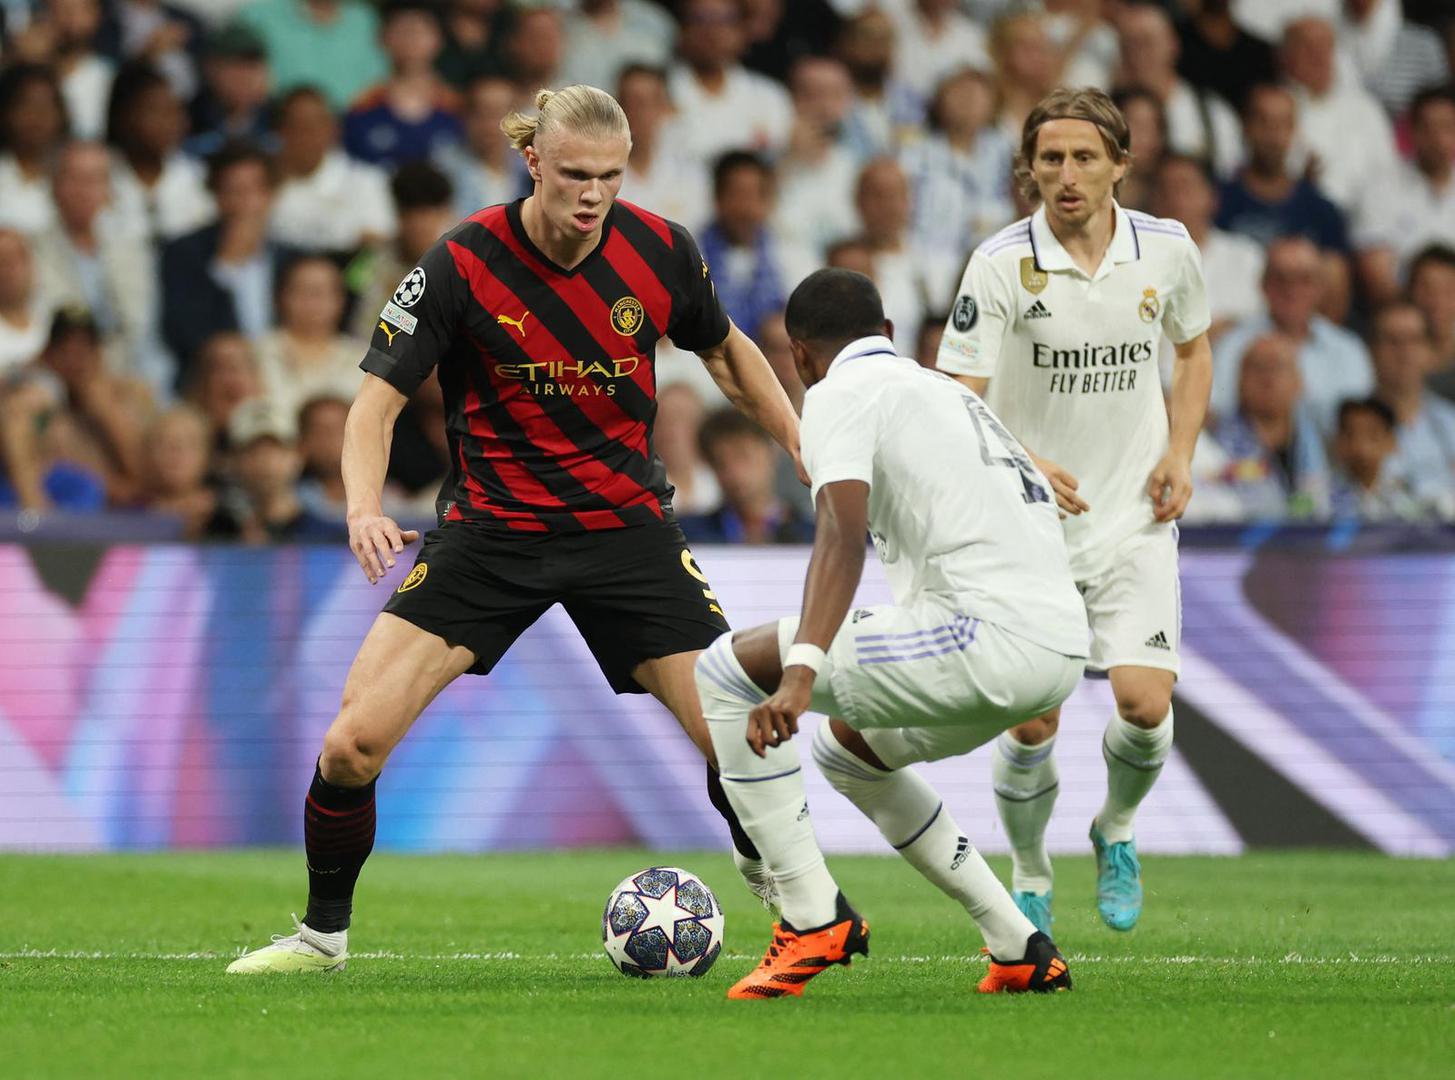 Soccer Football - Champions League - Semi Final - First Leg - Real Madrid v Manchester City - Santiago Bernabeu, Madrid, Spain - May 9, 2023 Manchester City's Erling Braut Haaland in action with Real Madrid's David Alaba and Luka Modric REUTERS/Isabel Infantes Photo: Isabel Infantes/REUTERS